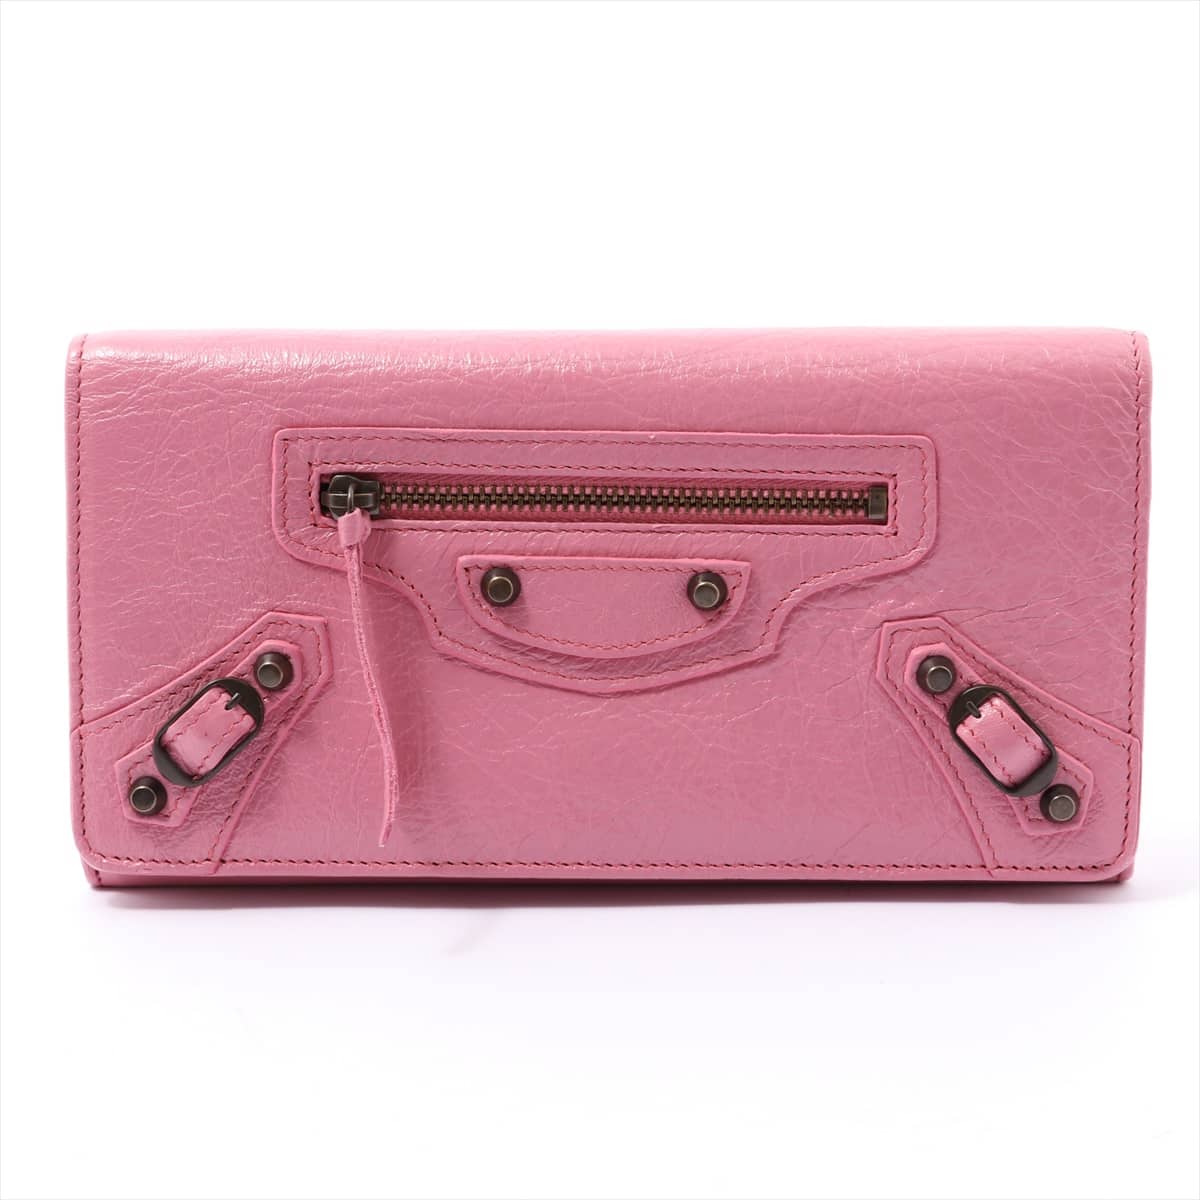 Balenciaga Classic 163471 Leather Wallet Pink